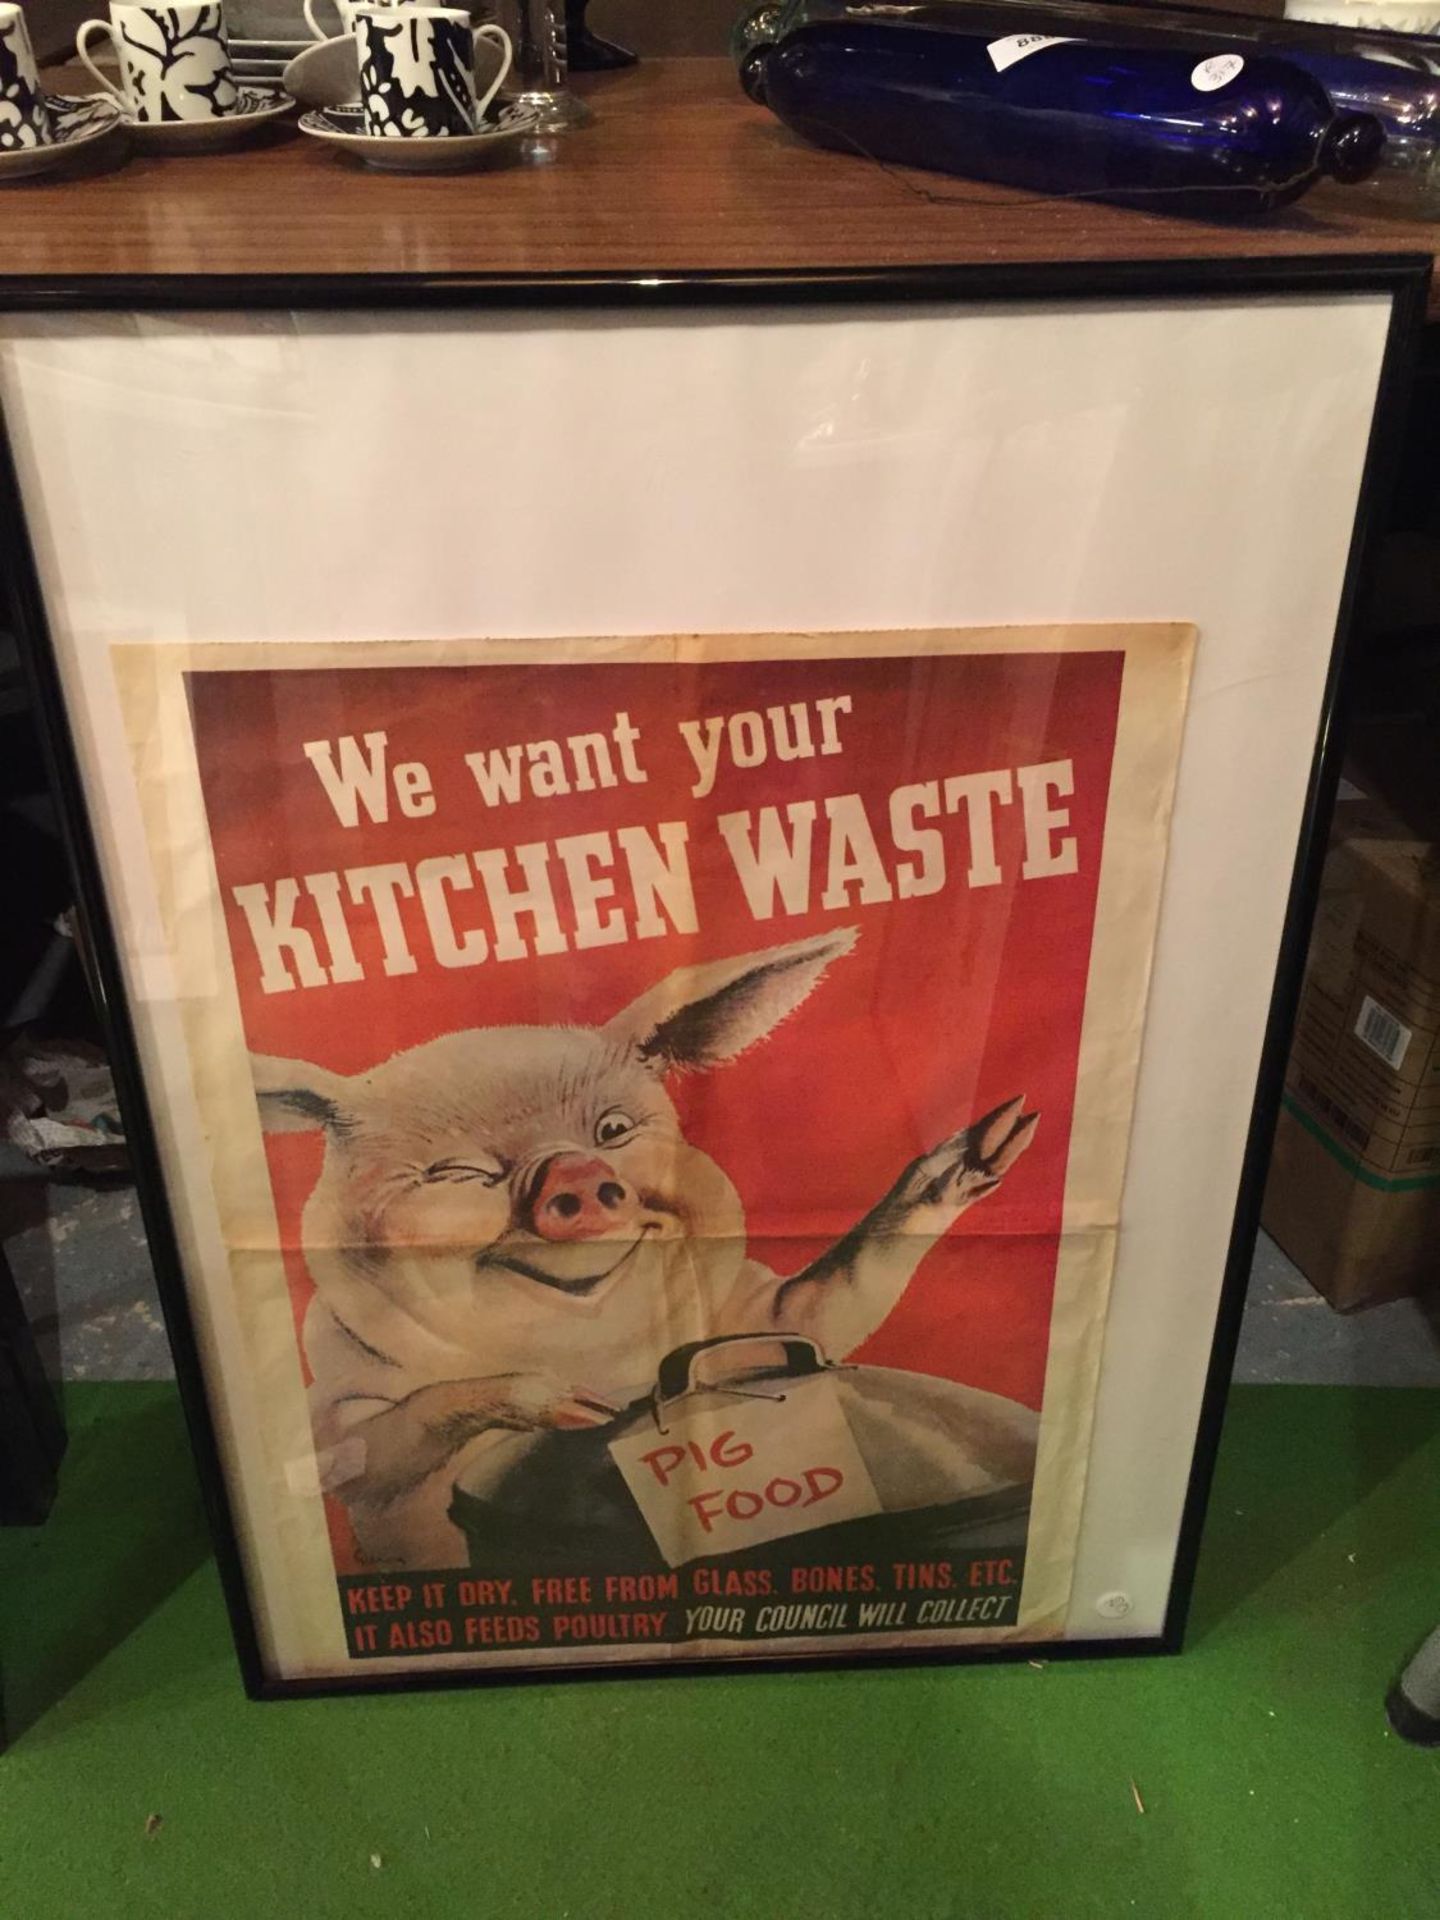 A WORLD WAR 11 FRAMED PROPOGANDA POSTER ABOUT KEEPING KITCHEN WASTE FOR THE PIGS